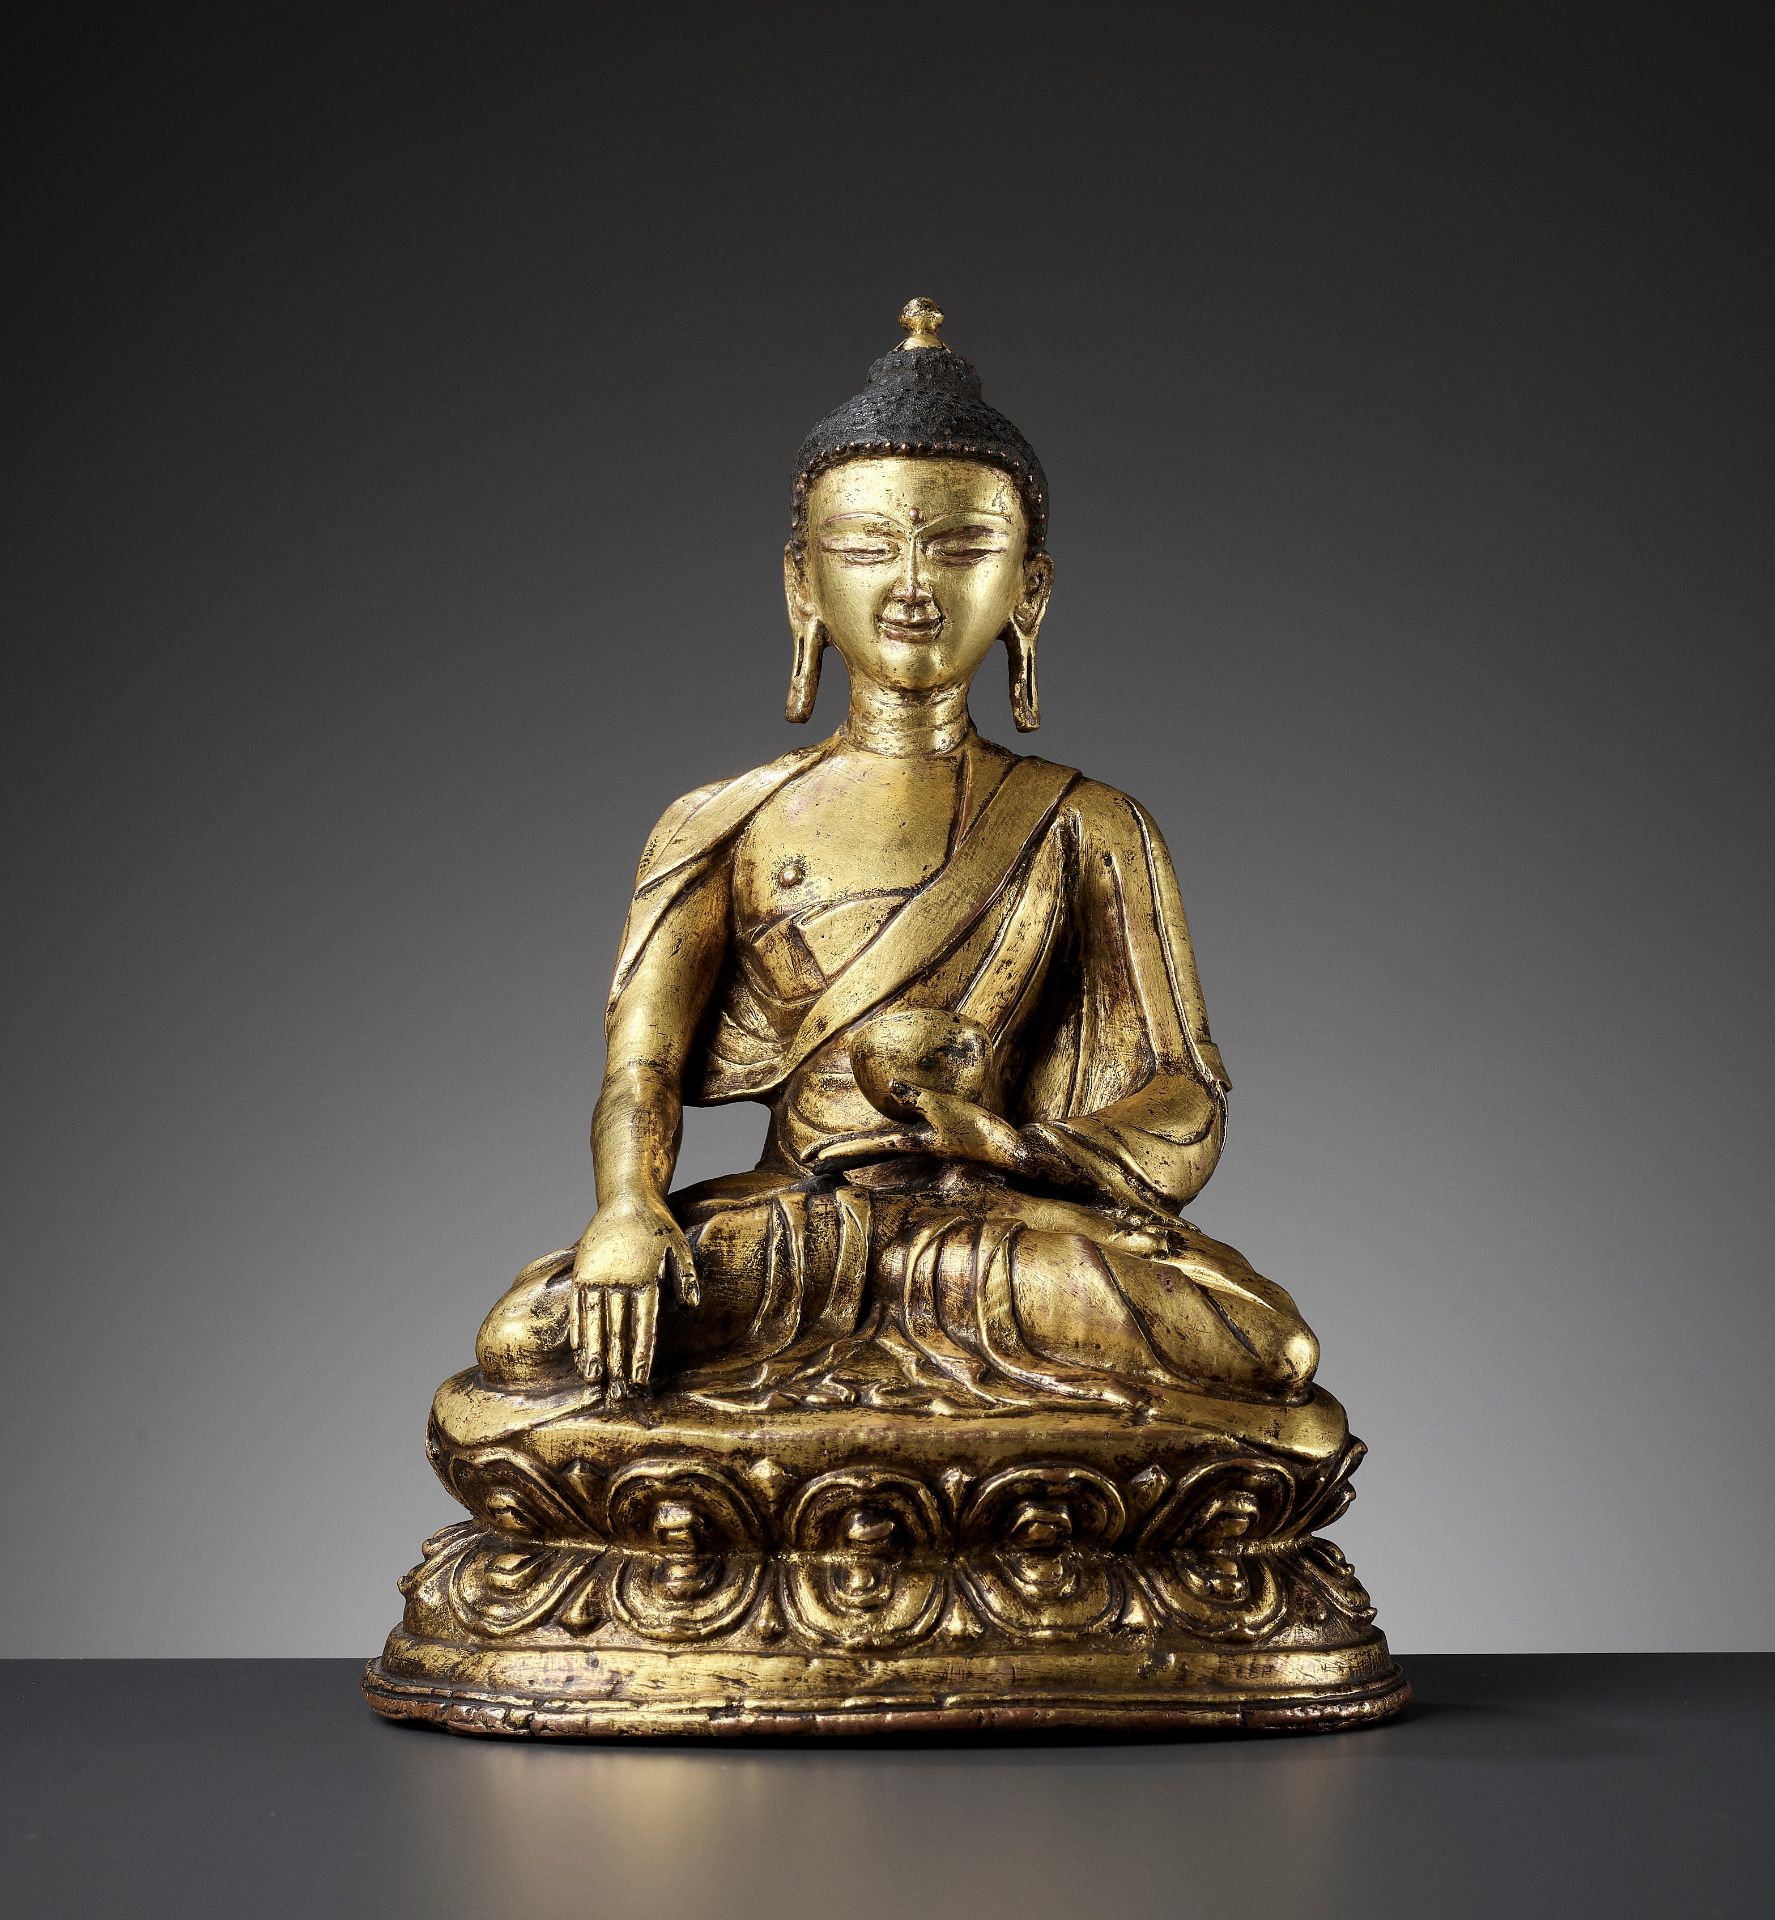 A GILT COPPER ALLOY FIGURE OF BUDDHA, 11TH-12TH CENTURY - Image 2 of 17